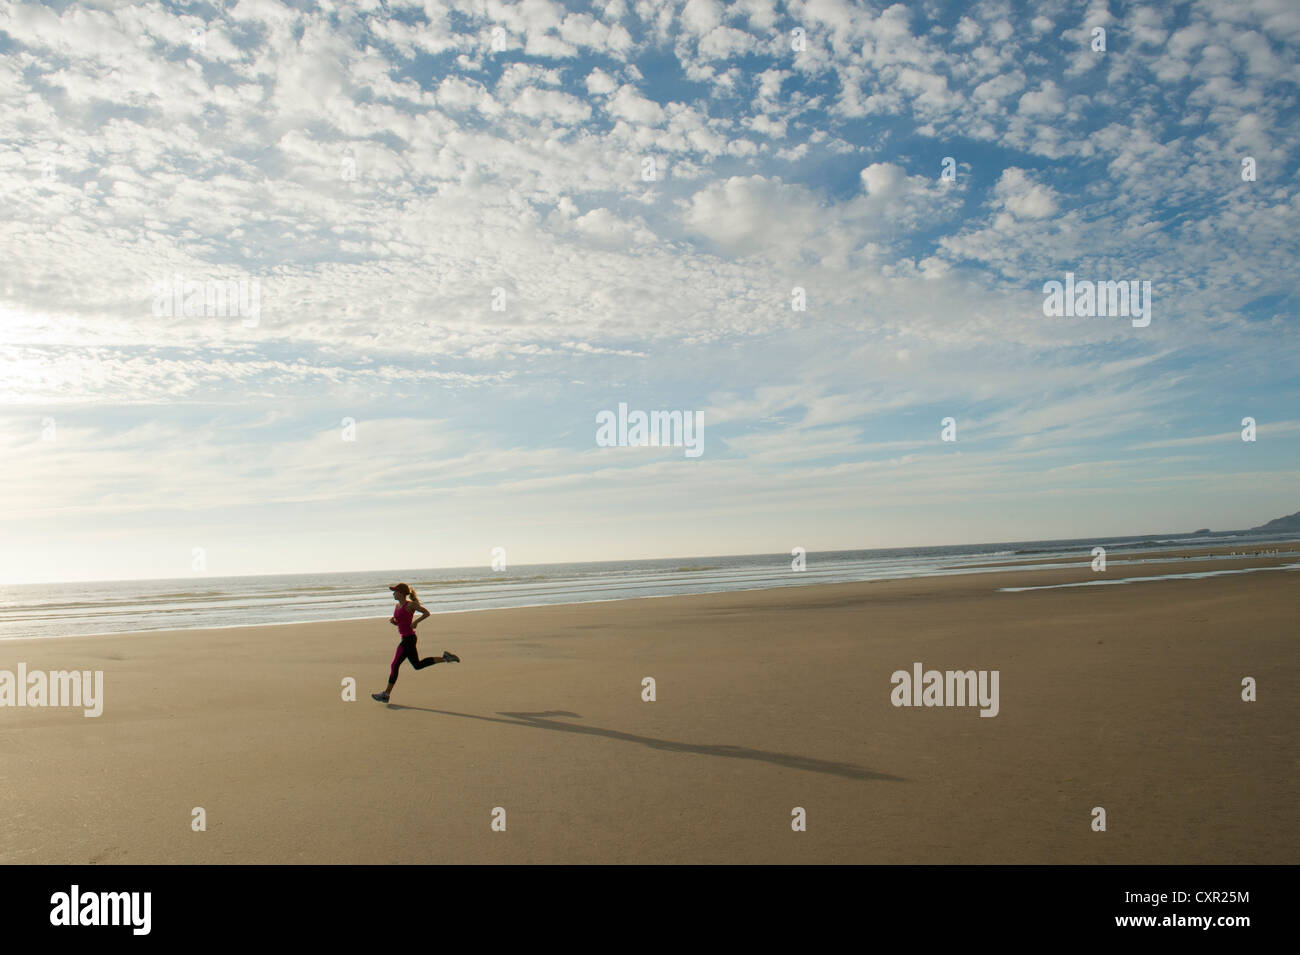 Young woman running on beach Banque D'Images